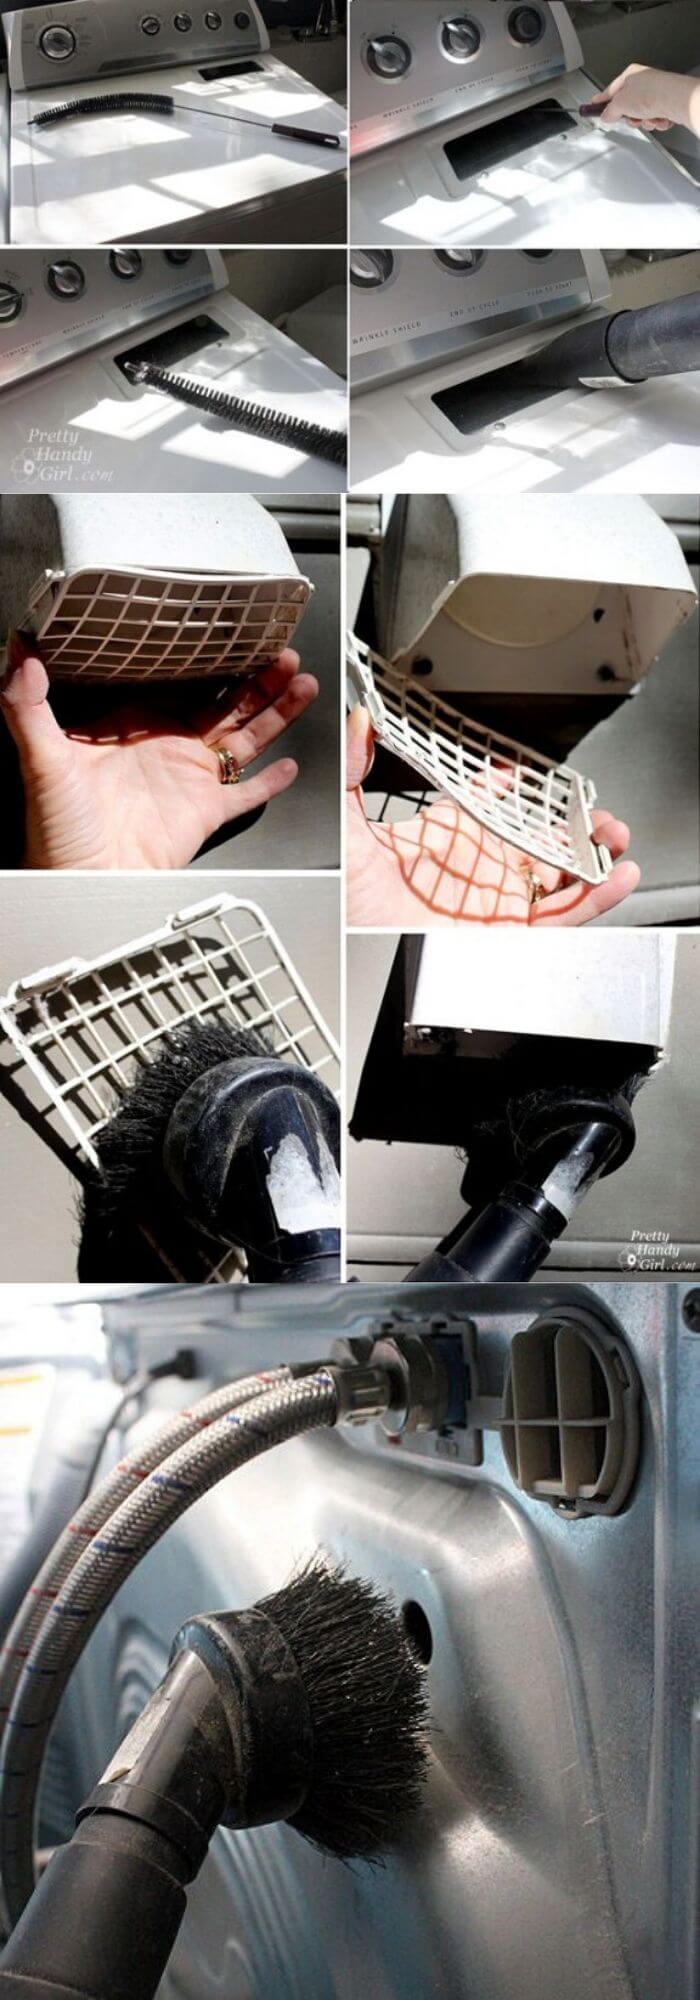 How to clean your dryer ducts